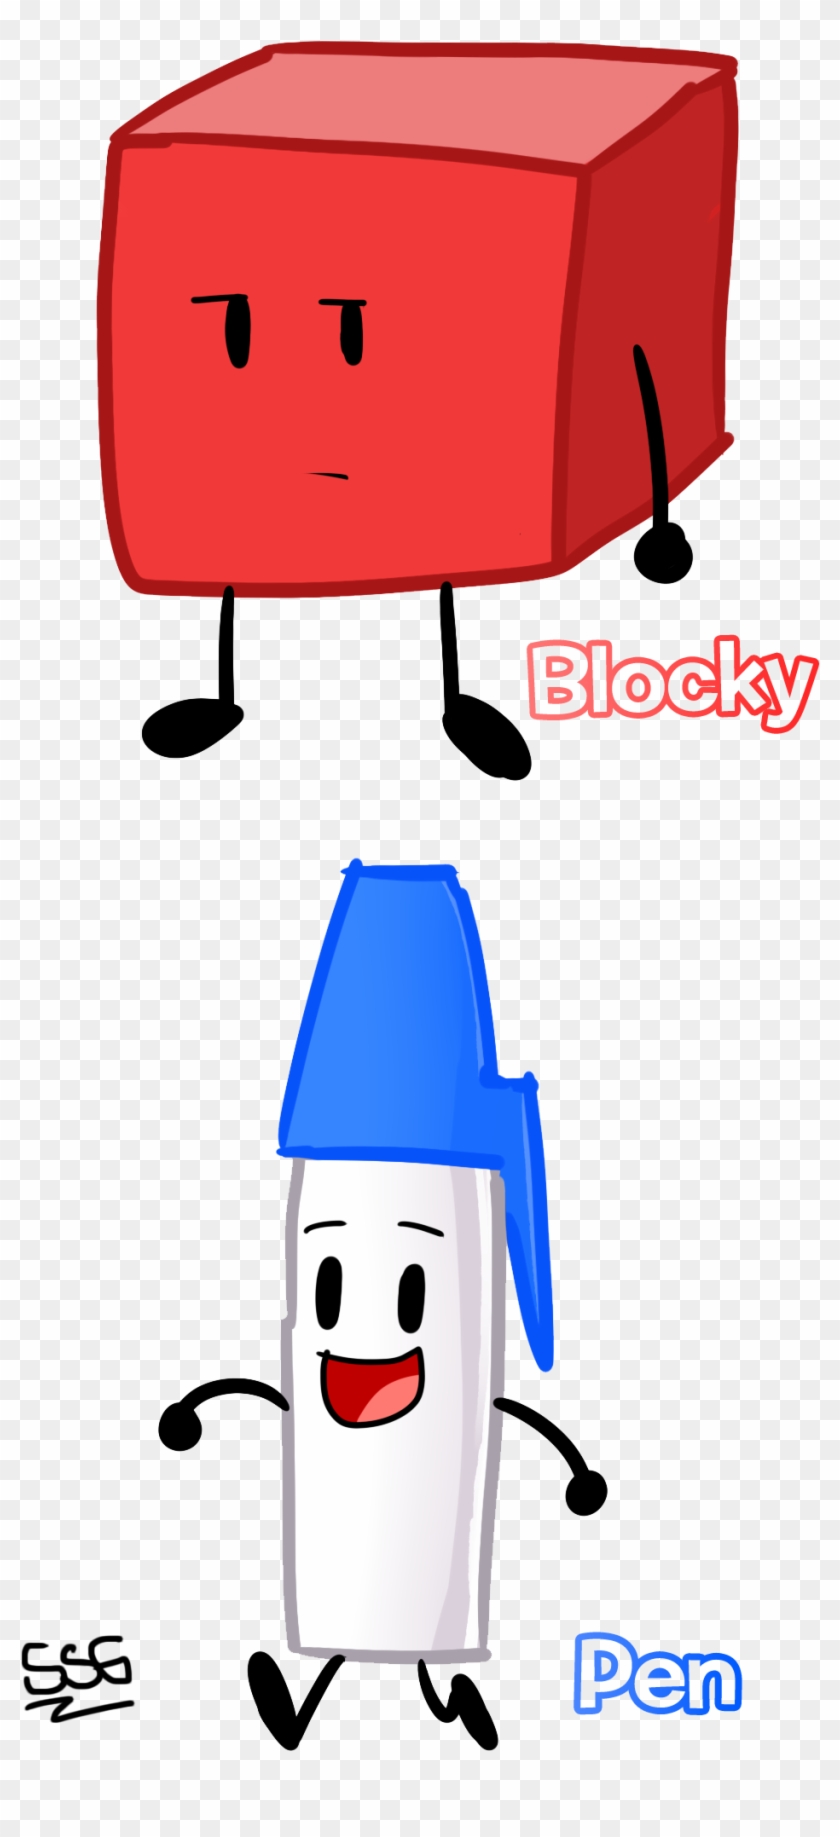 Blocky And Pen By Sweetstarrygalaxies - Bfdi Blocky And Pen #1070821